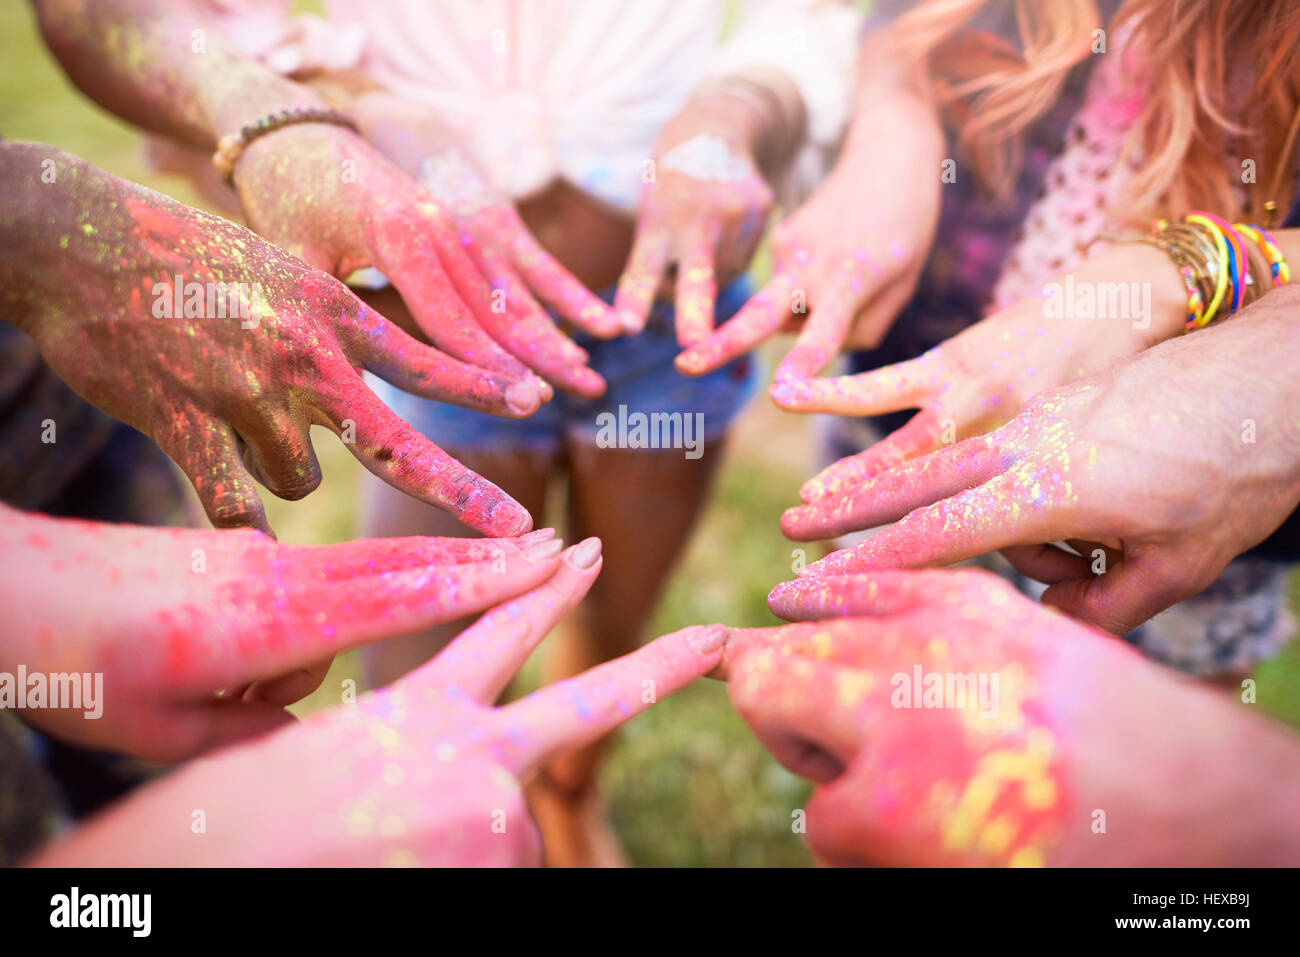 Group of friends at festival, covered in colourful powder paint, connecting fingers with peace signs, close-up Stock Photo